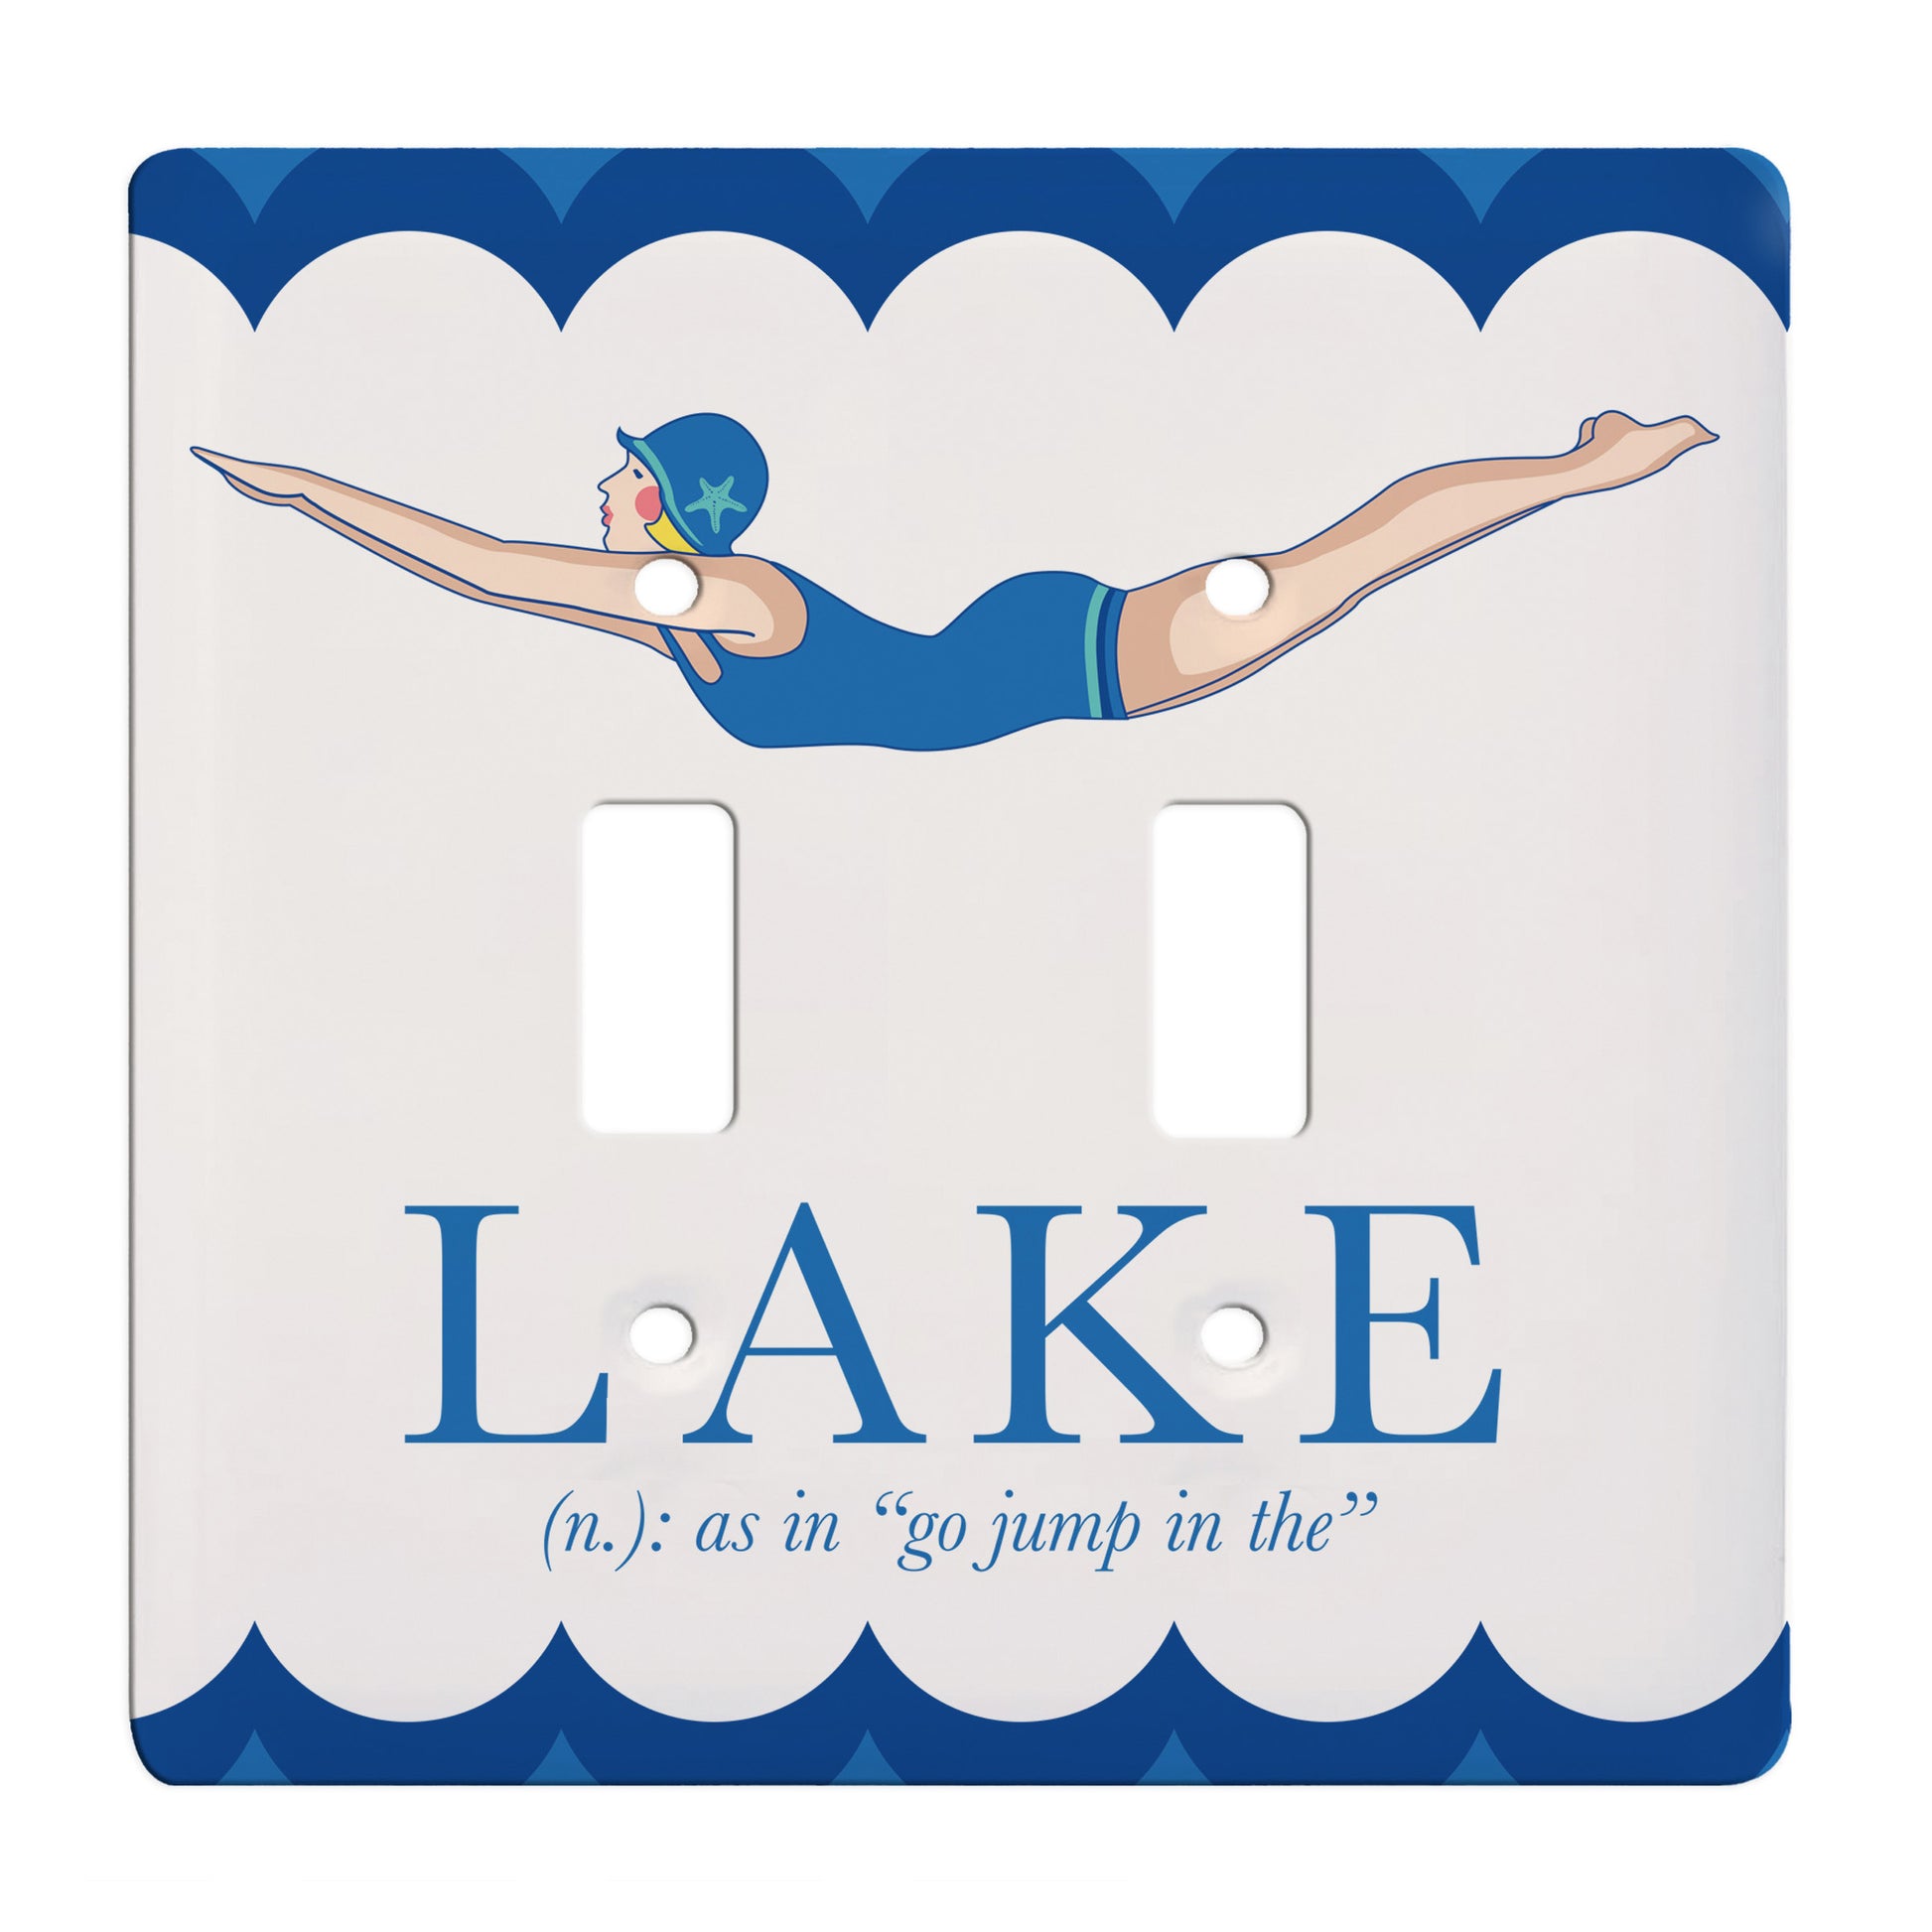 ceramic double toggle switch plate featuring a woman in a bathing suit diving and text reading "Lake (noun), as in 'go jump in the'". the switch plate also features wave embellishments along the edges. 